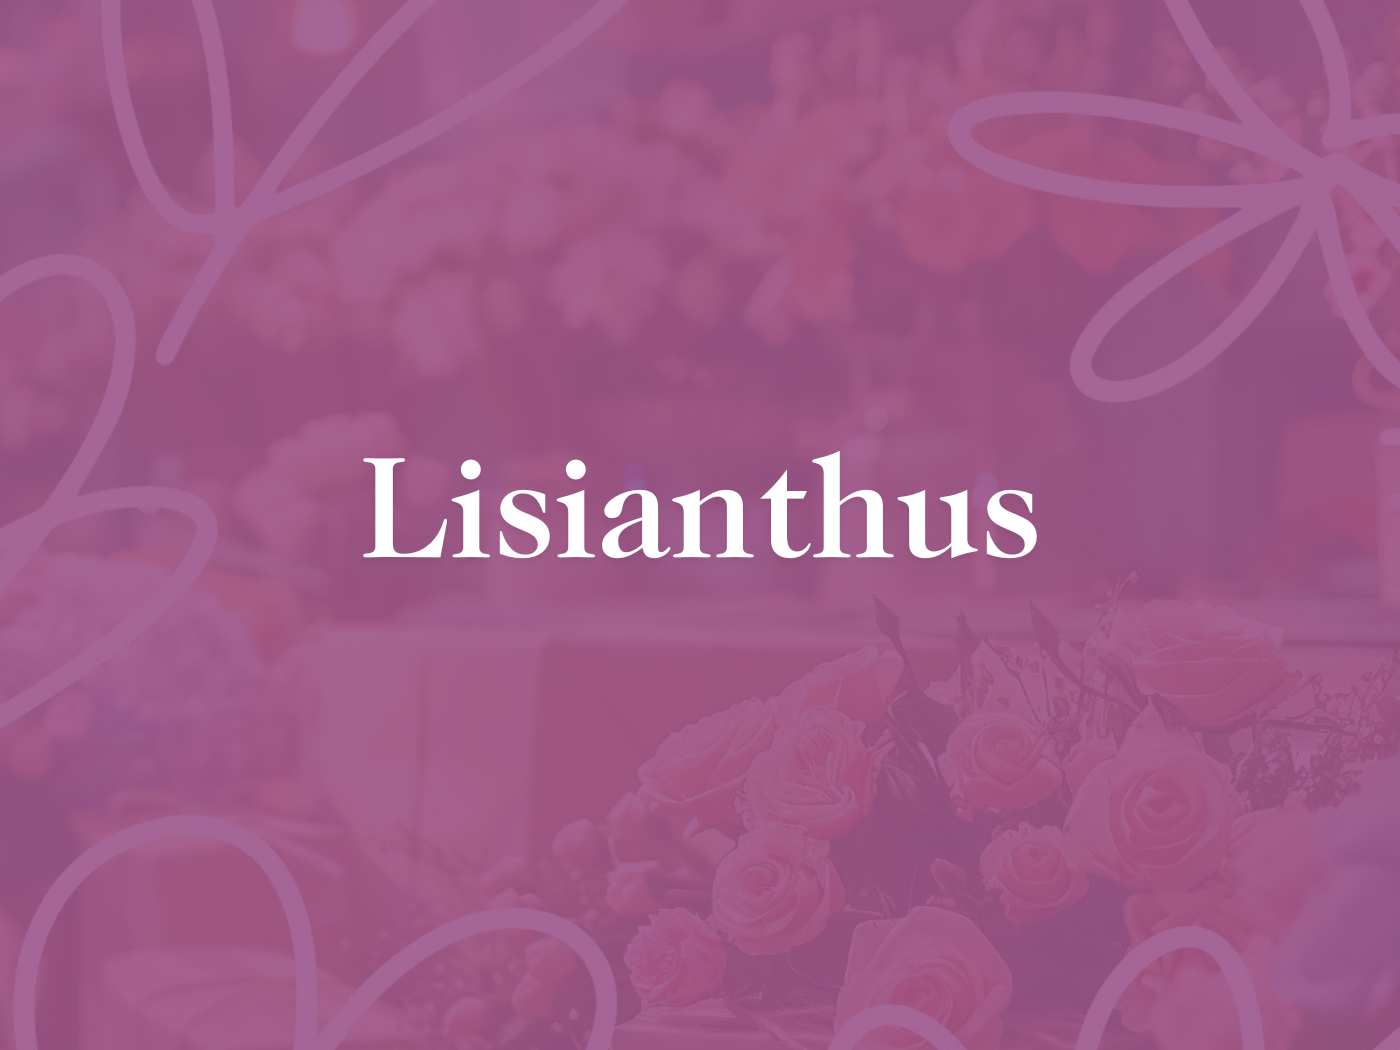 A monochrome pink-toned image featuring a soft focus on a variety of flowers, prominently displaying lisianthus, for the Lisianthus Collection by Fabulous Flowers and Gifts. This artistic depiction enhances the elegant and subtle beauty of the collection.